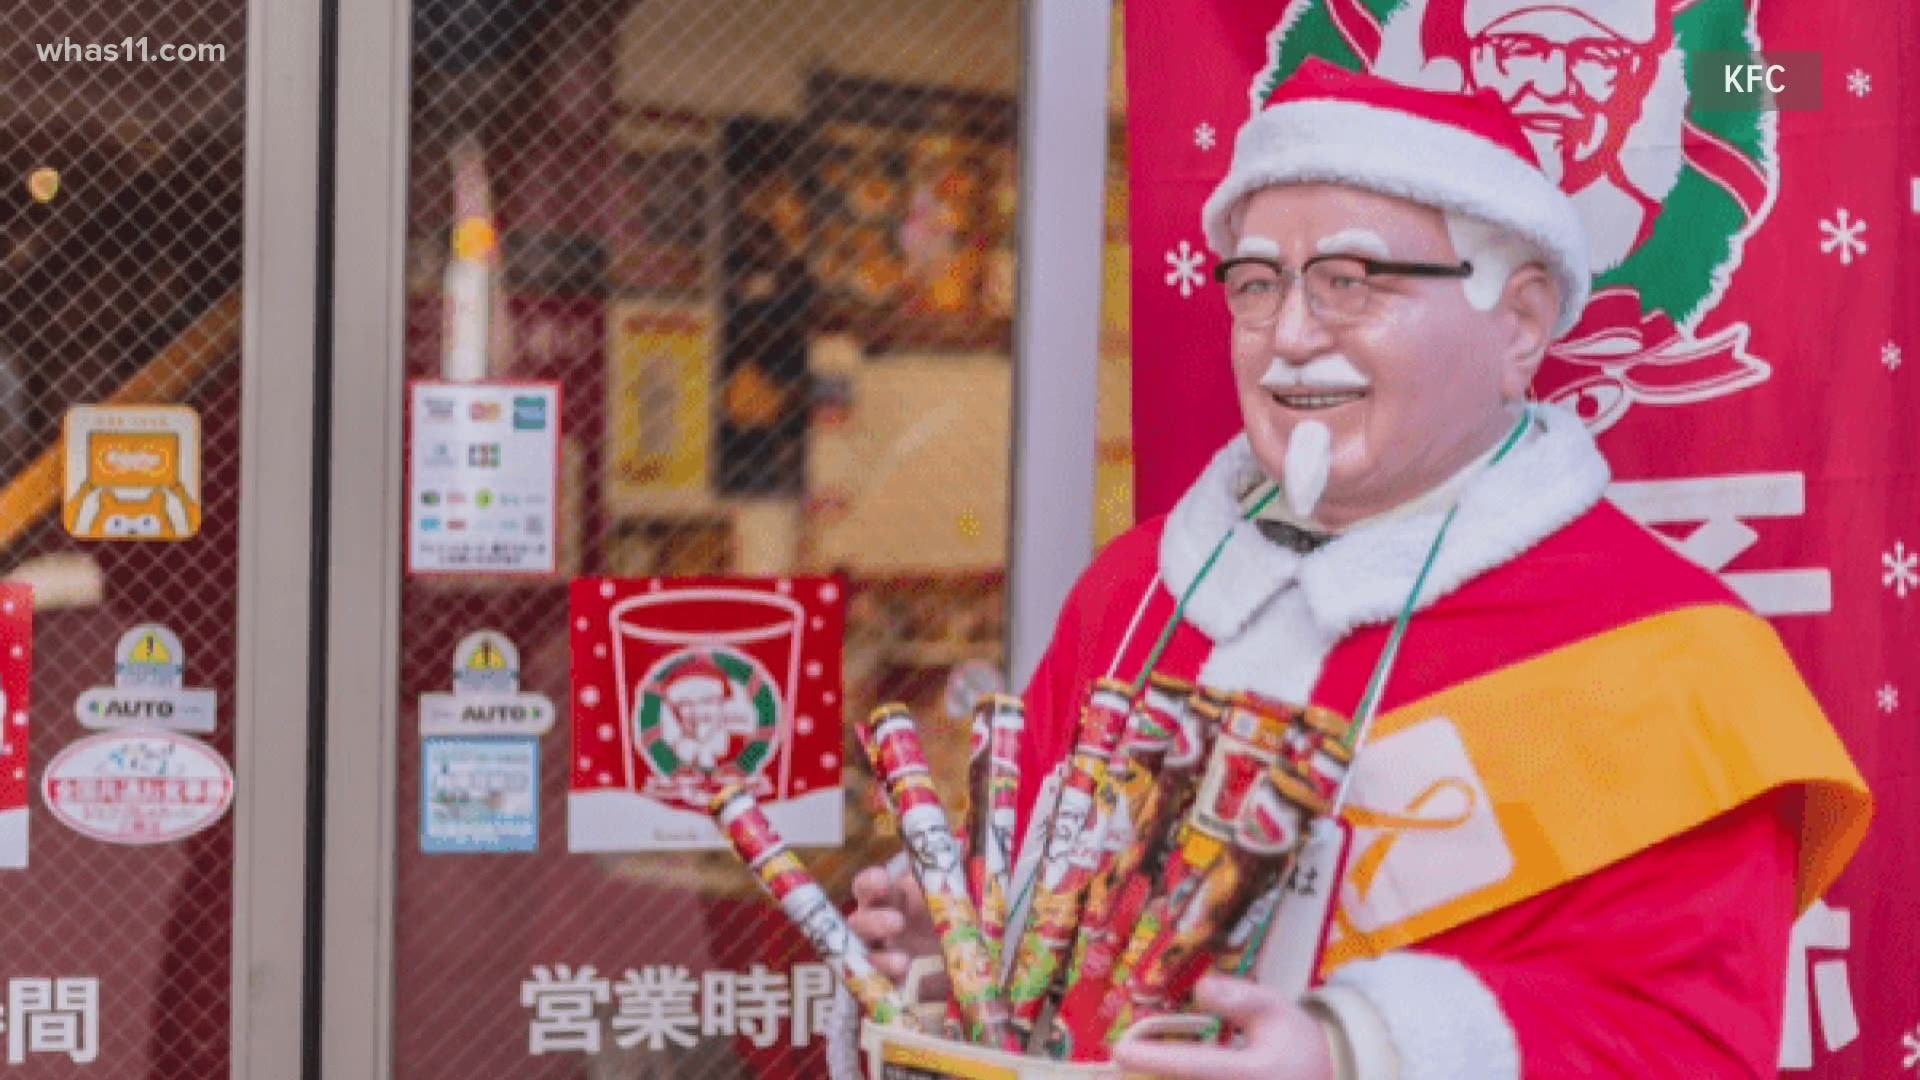 KFC launched an ad to eat fried chicken on Christmas instead of turkey, which isn't as common in Japan. Today, around 3.6 million families eat KFC on Christmas.